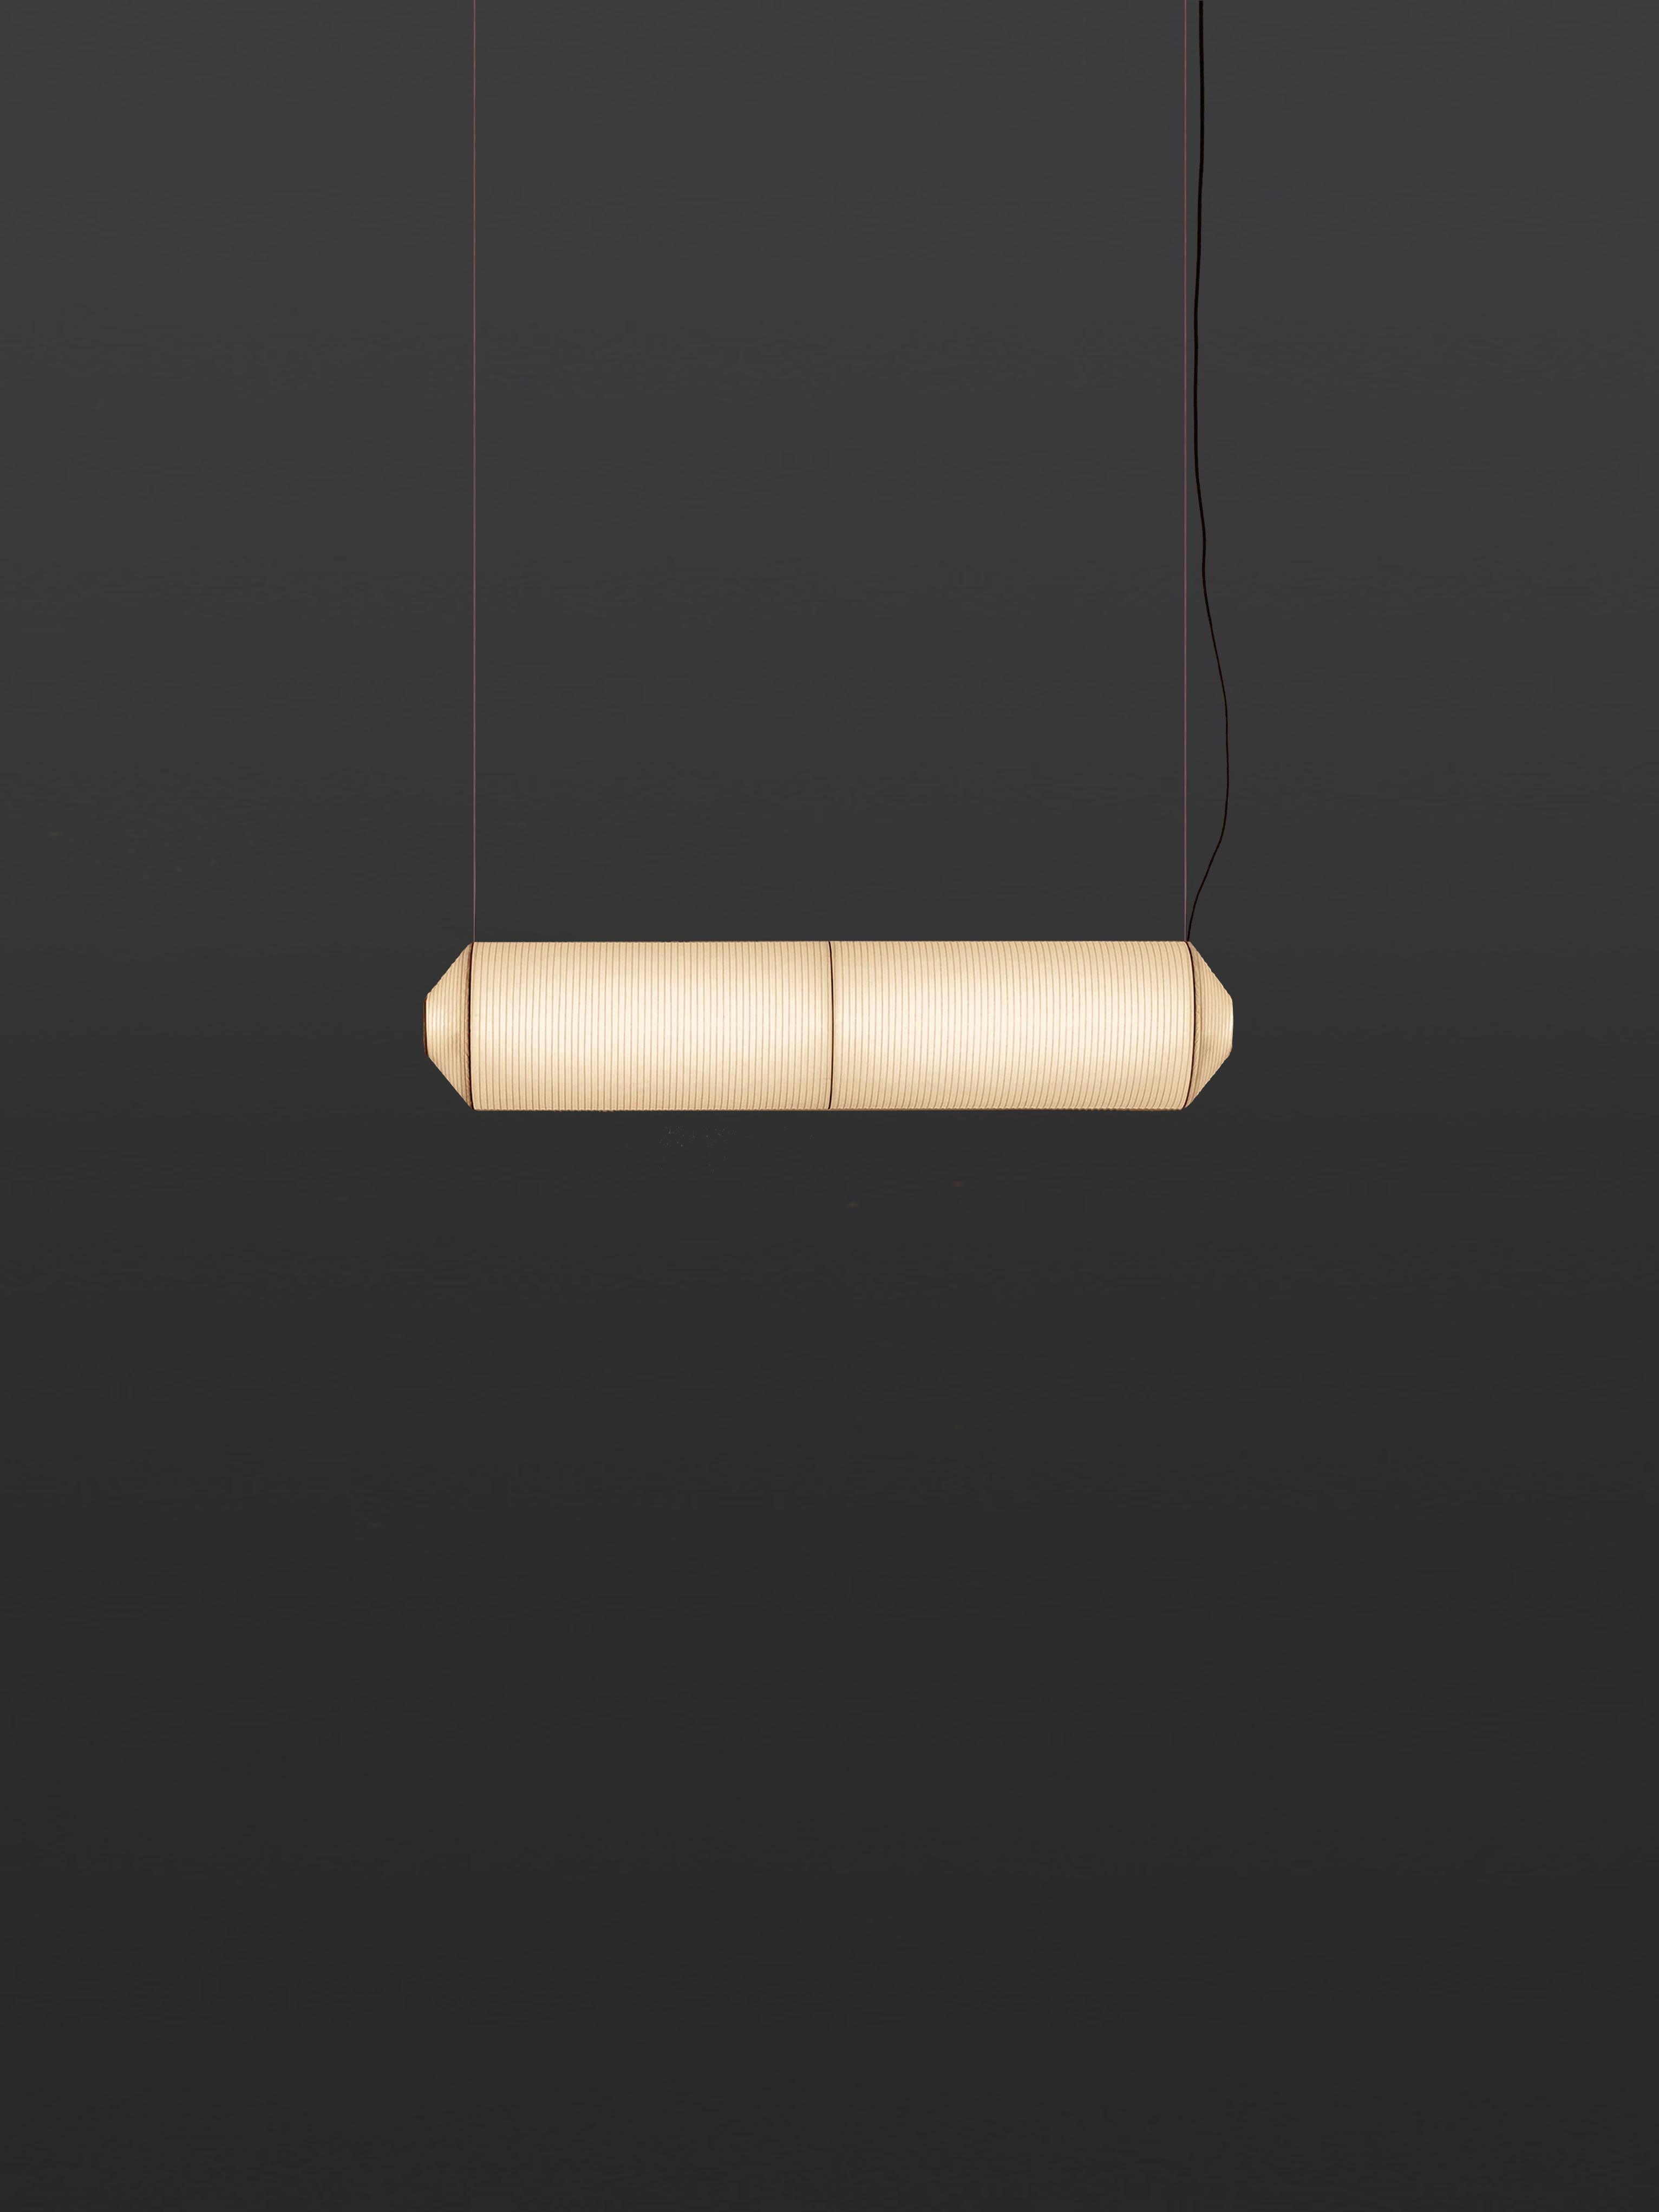 Tekiò horizontal P2 pendant lamp by Anthony Dickens
Dimensions: D 25 x W 120 x H 25 cm
Materials: Metal, Washi japanese paper shade.
Available in circular or rectangular canopy.

Tekiò, the Japanese word for adaptation, merges ancient artisan